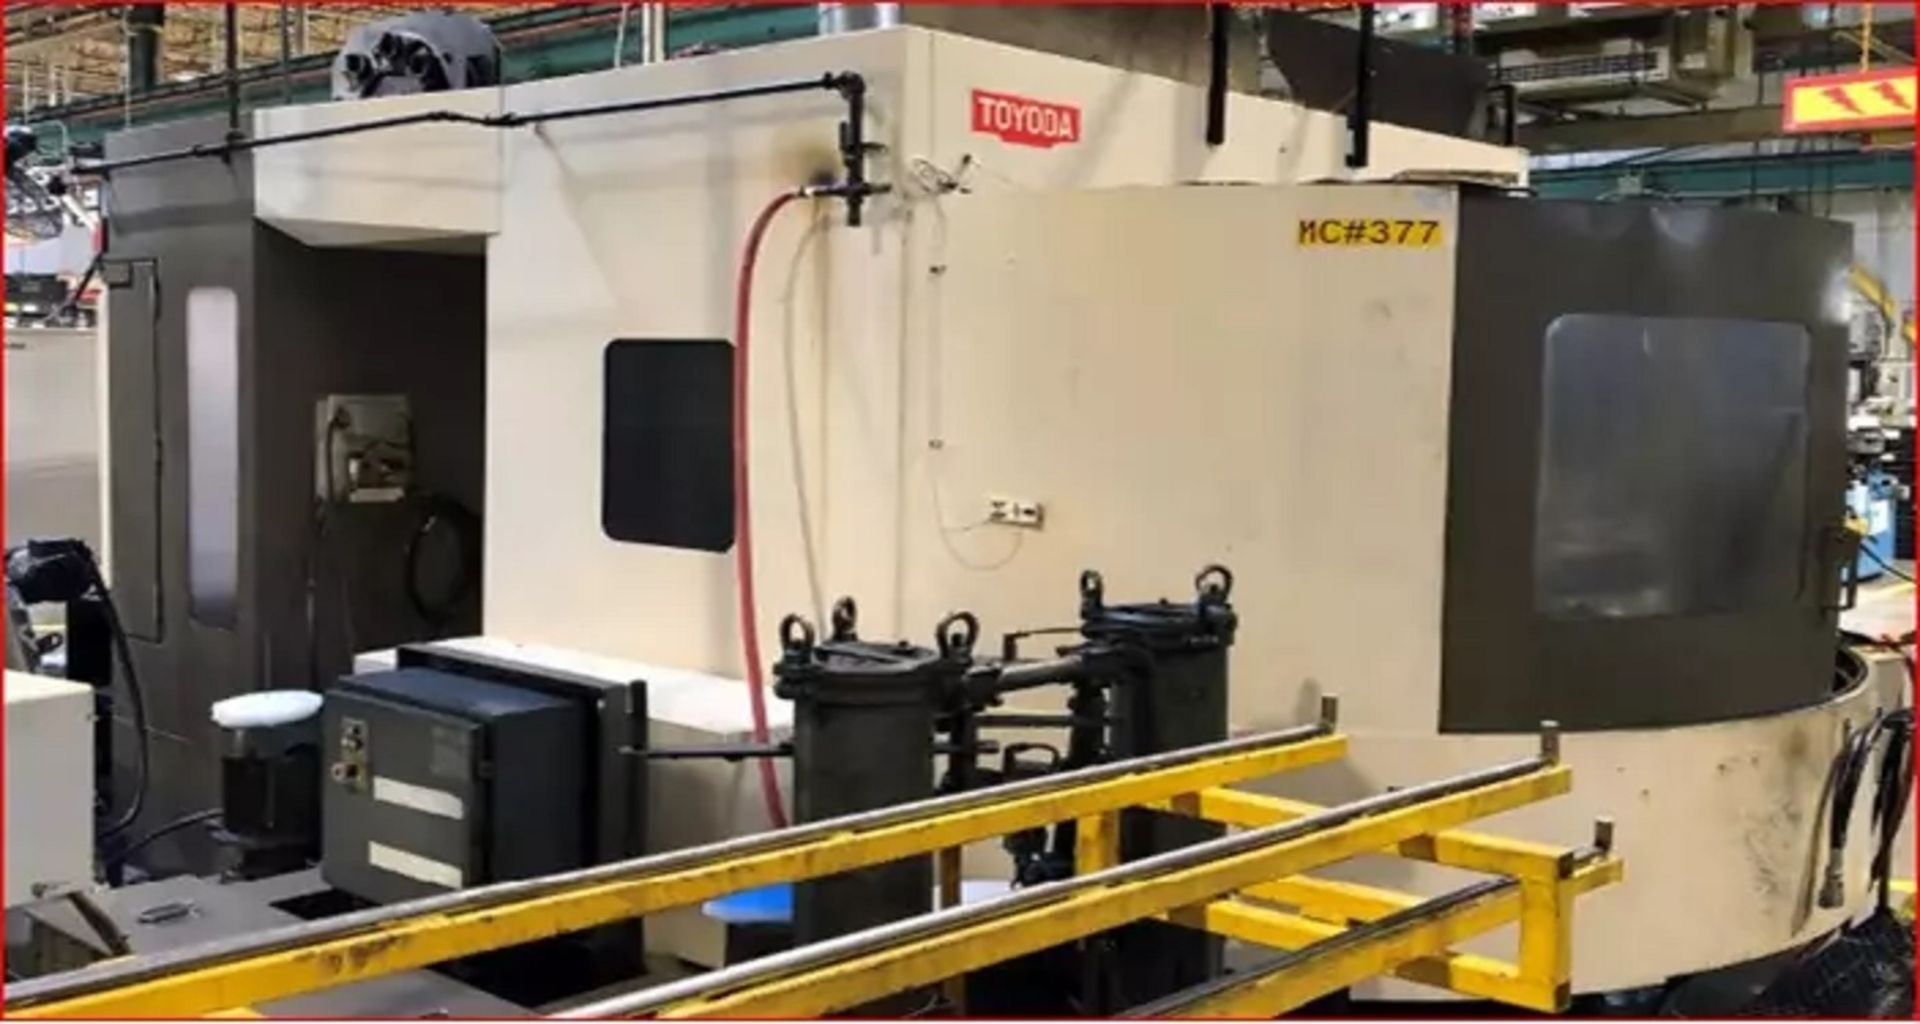 24.8" X 24.8" Pallets Toyoda FH630SX CNC 4-Axis Horizontal Machining Center, S/N NS1429, New 2006 - Image 10 of 10